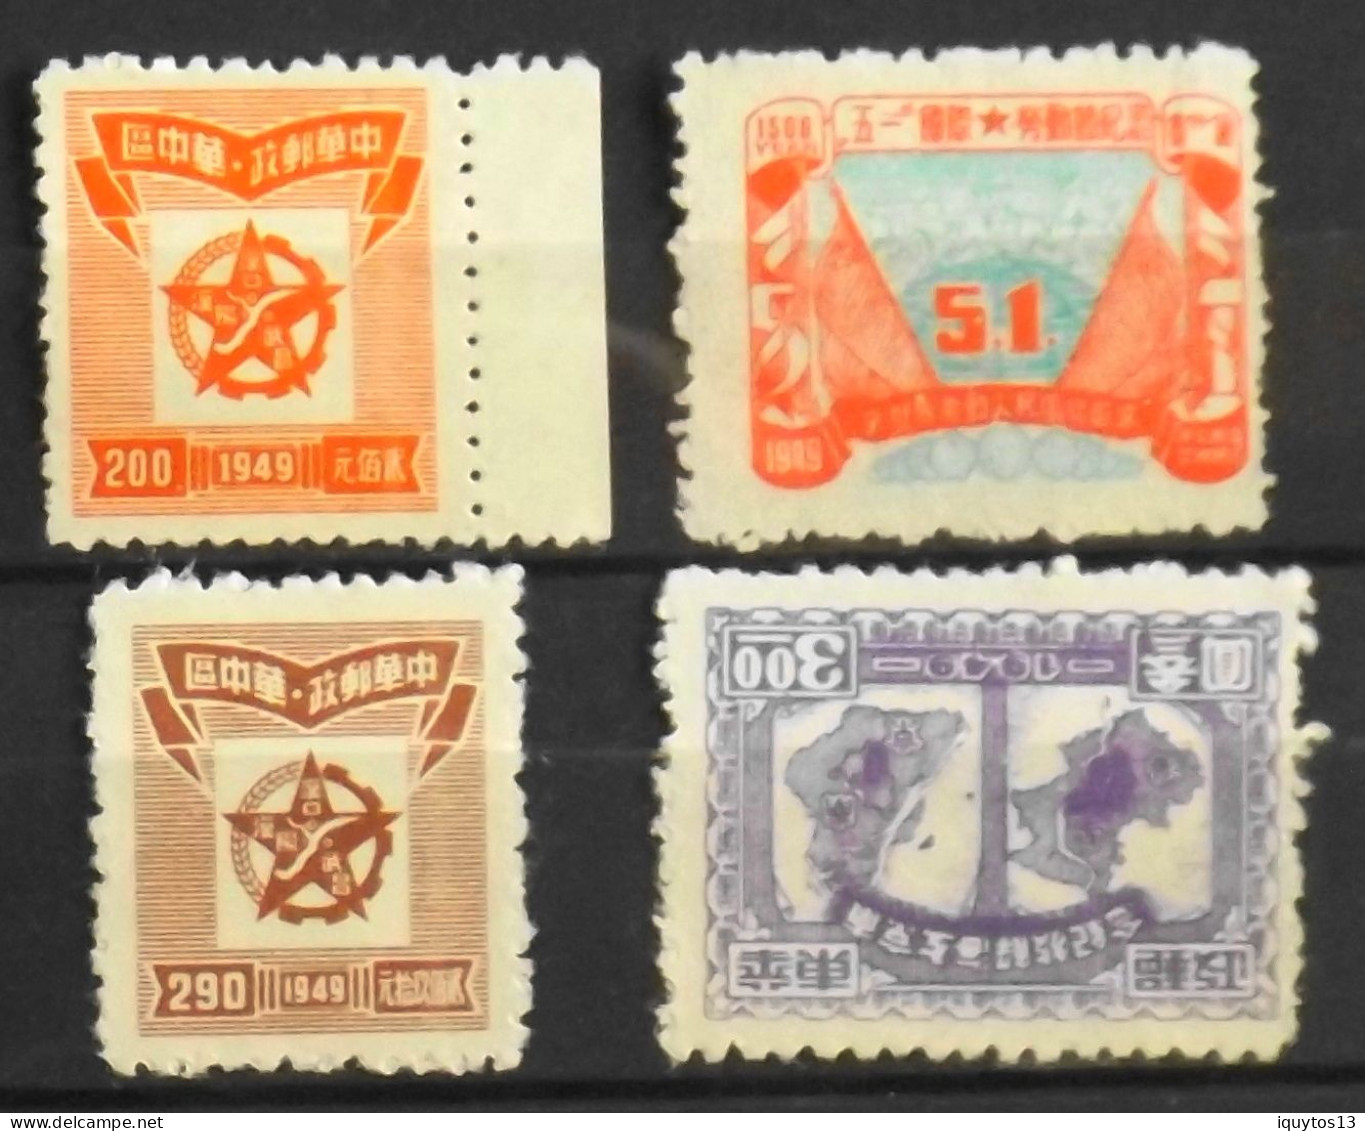 CHINE - ETOILE 1949 - 4 Timbres Neufs S.G. - Zentralchina 1948-49